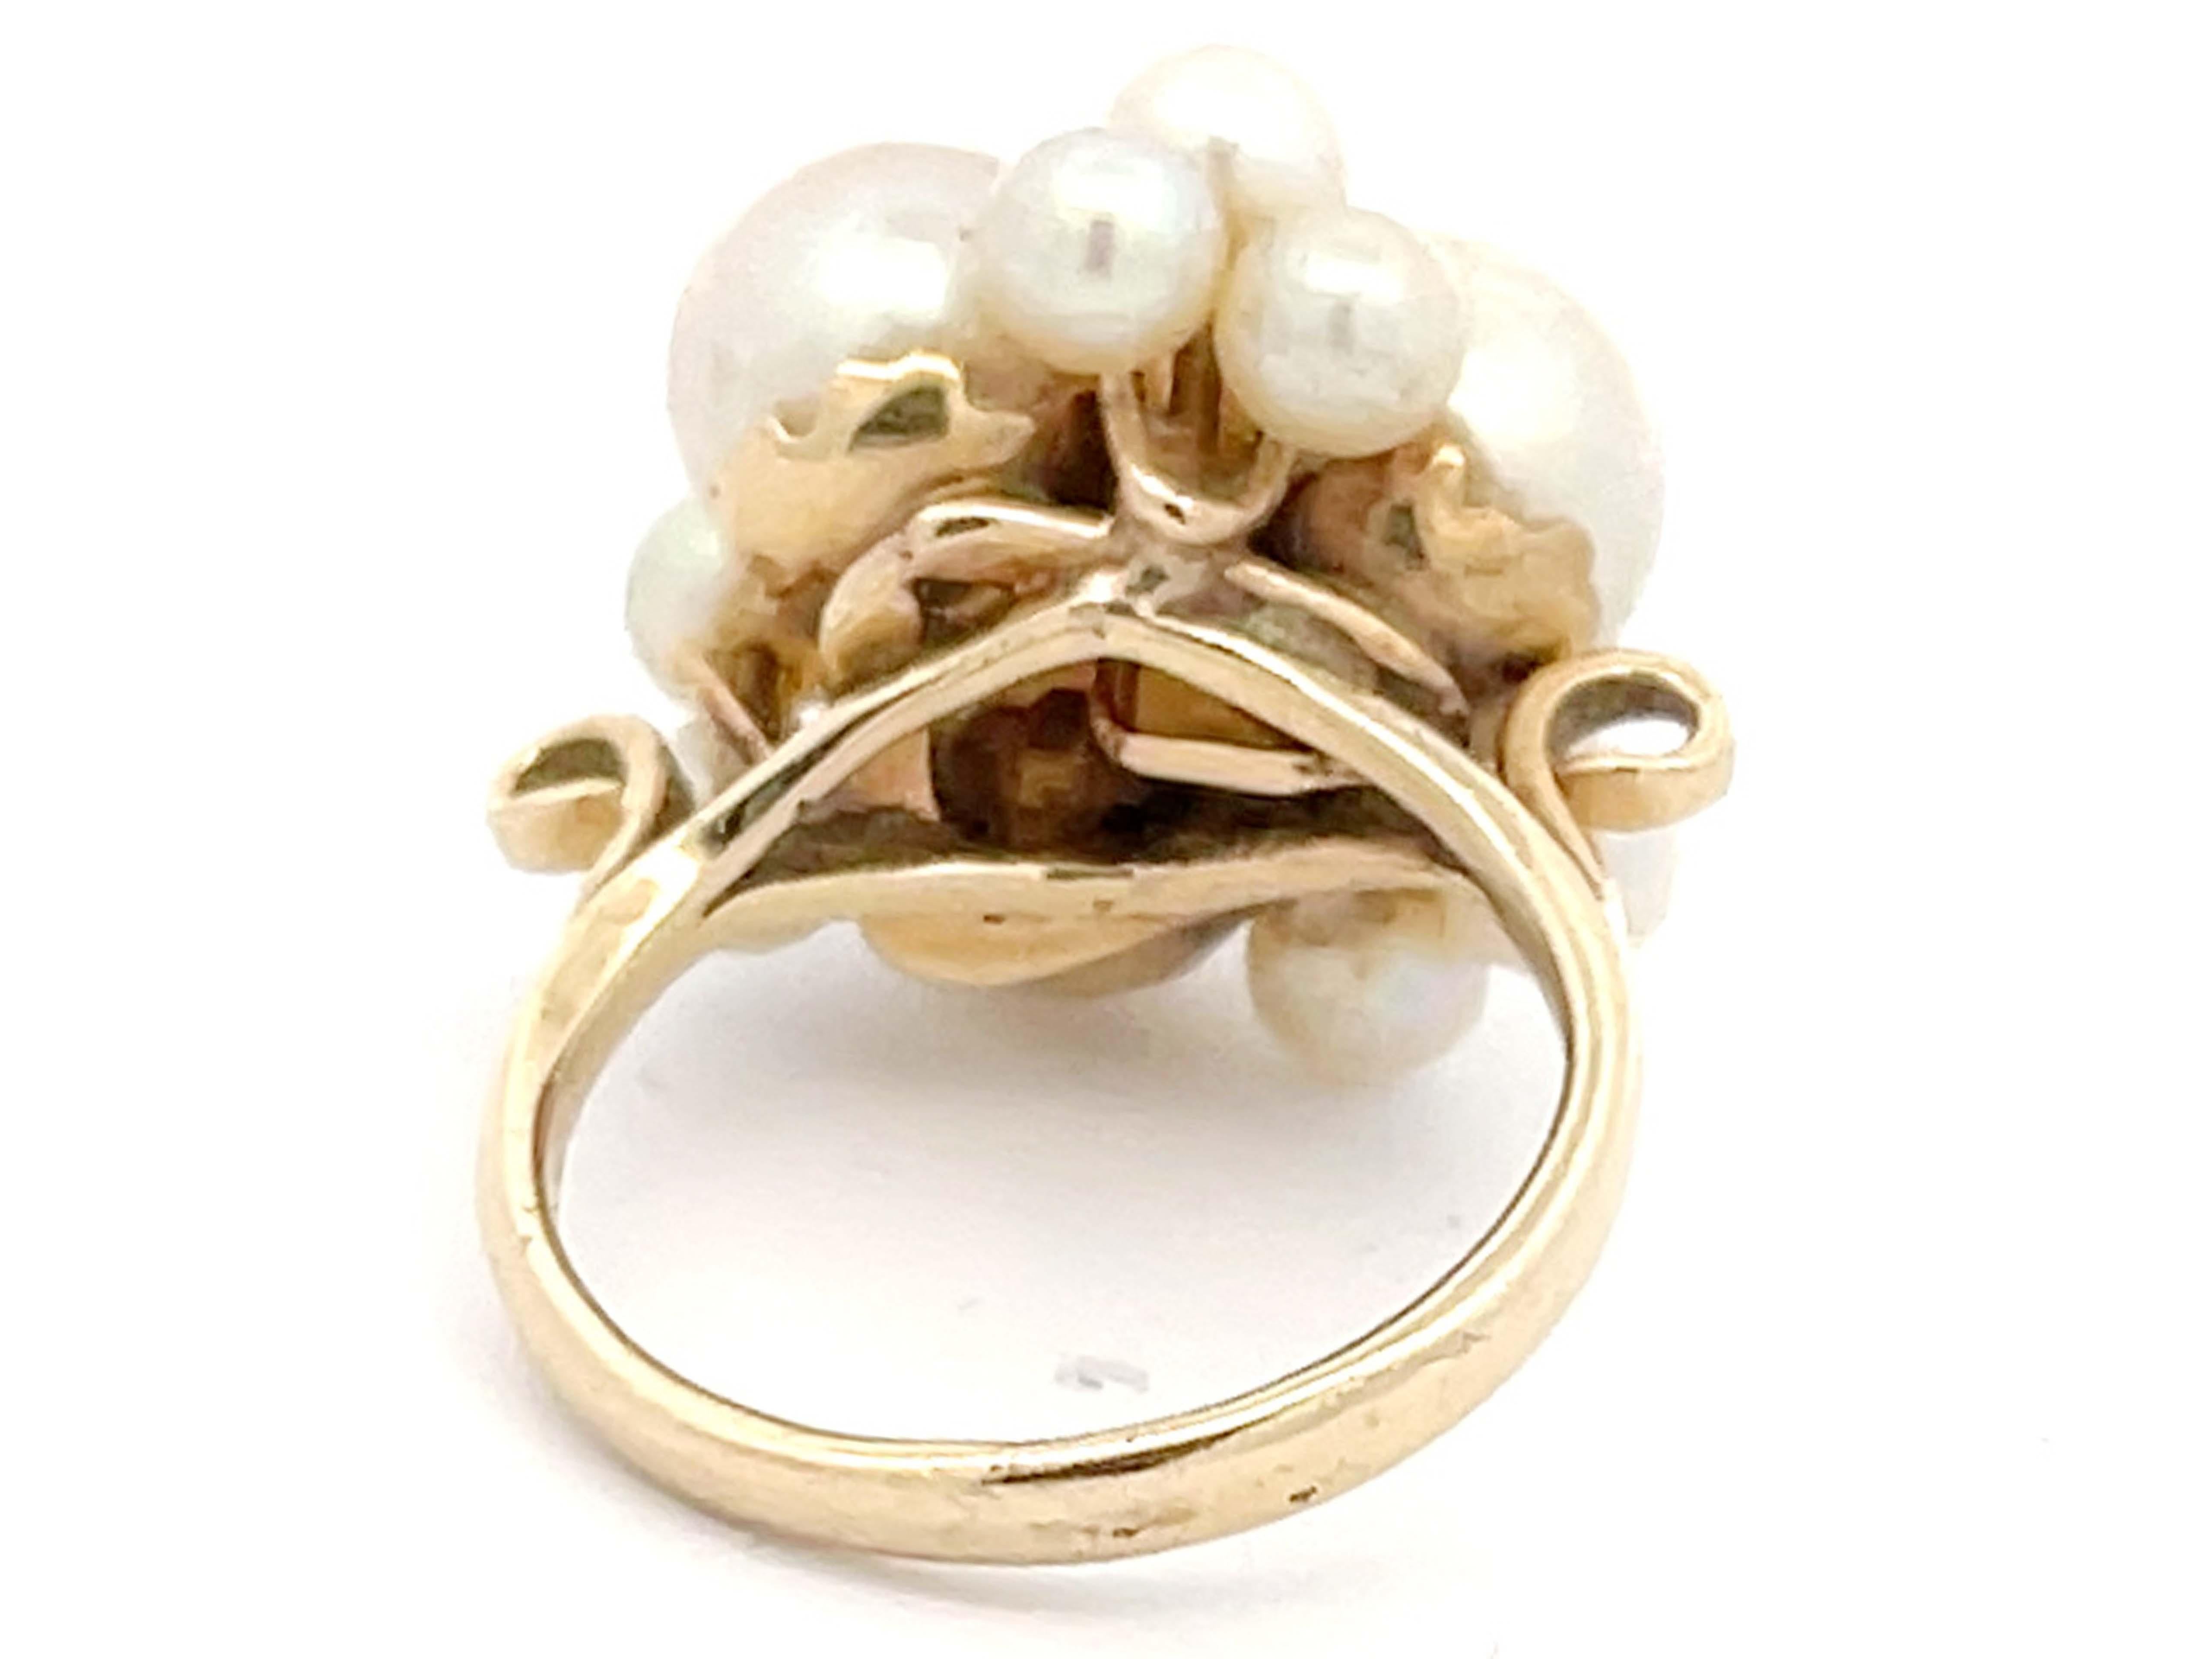 Mings Akoya Pearl Ring in 14k Yellow Gold In Excellent Condition For Sale In Honolulu, HI